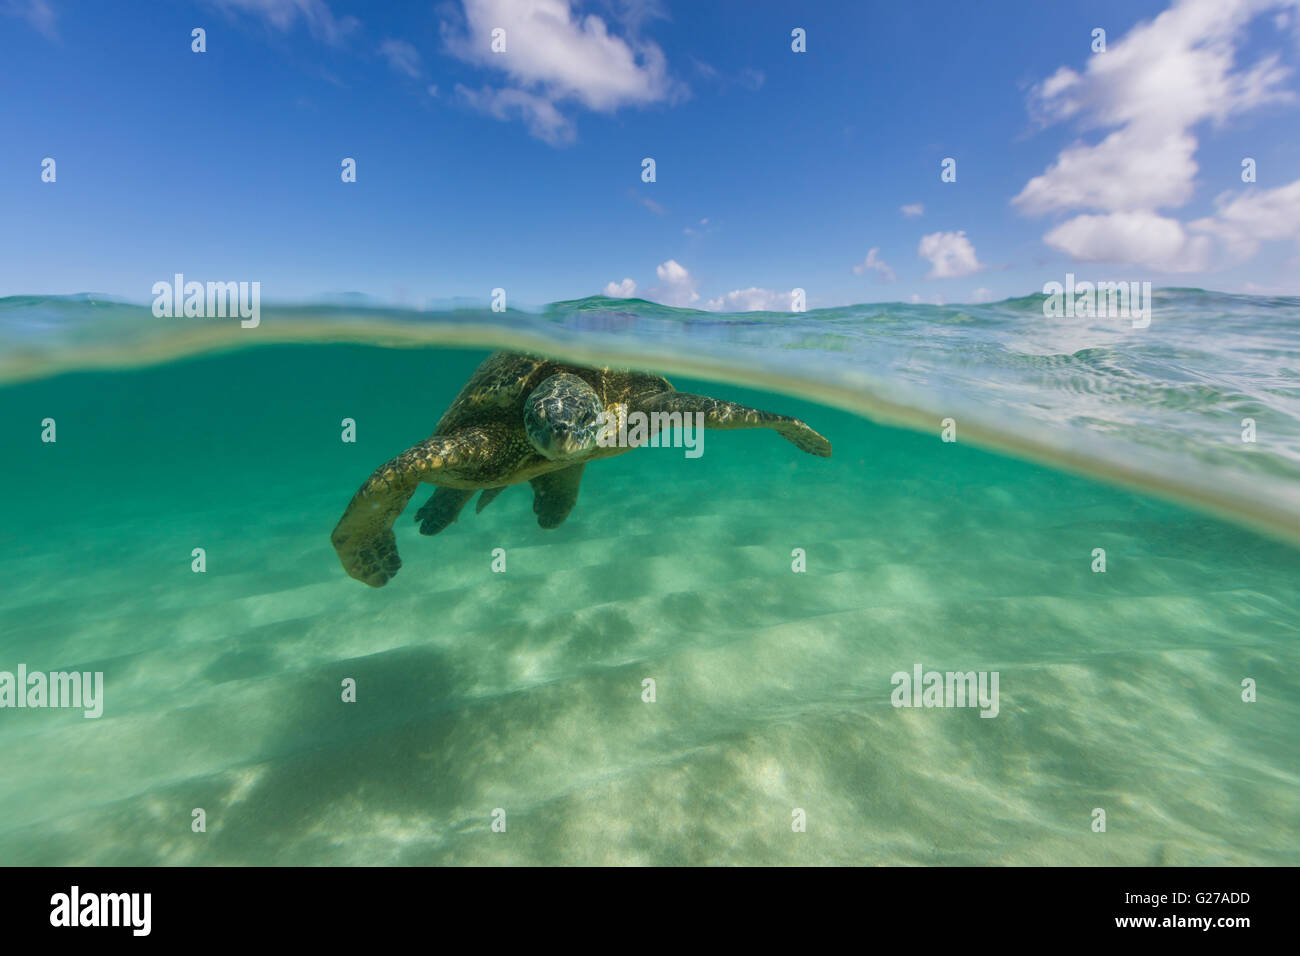 An over under view of a Hawaiian green sea turtle in the ocean swimming. Stock Photo